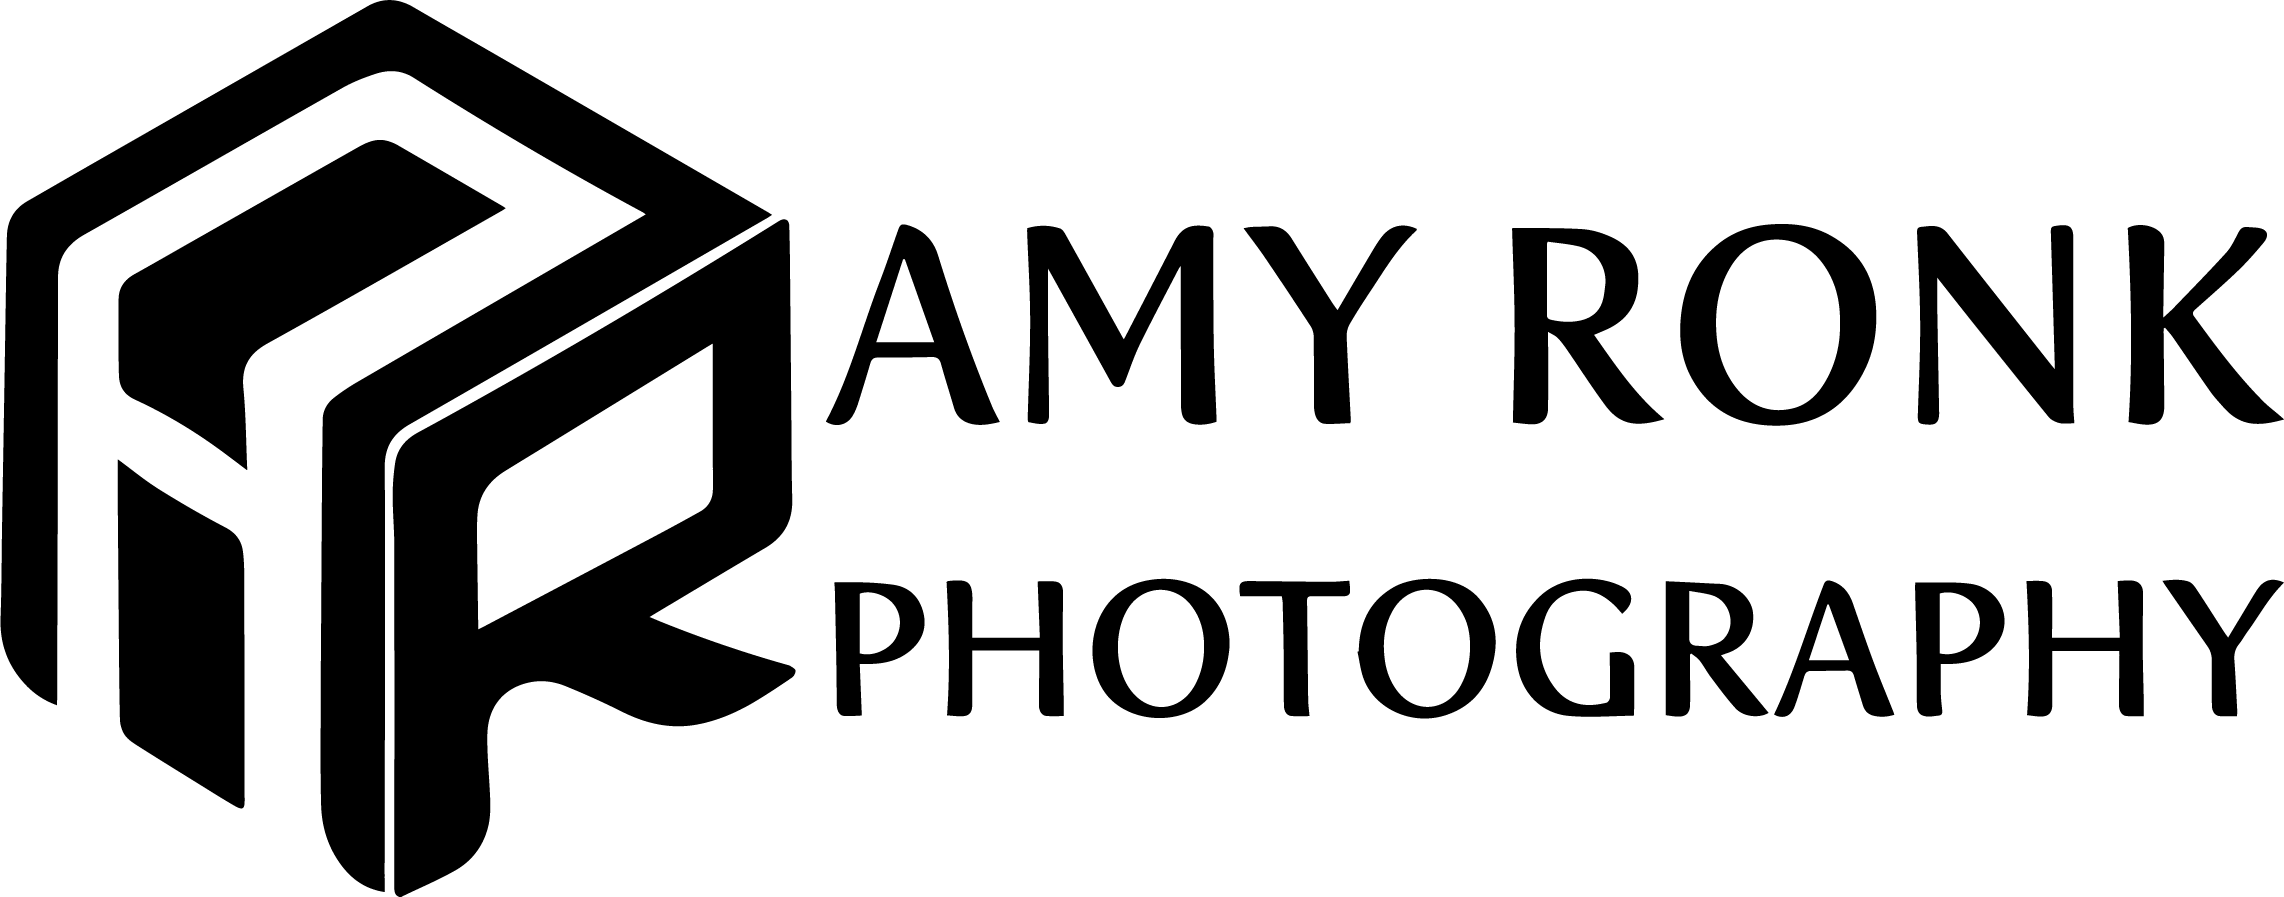 Amy Ronk Photography | Wedding/Fine Art/Products | Denver Photographer